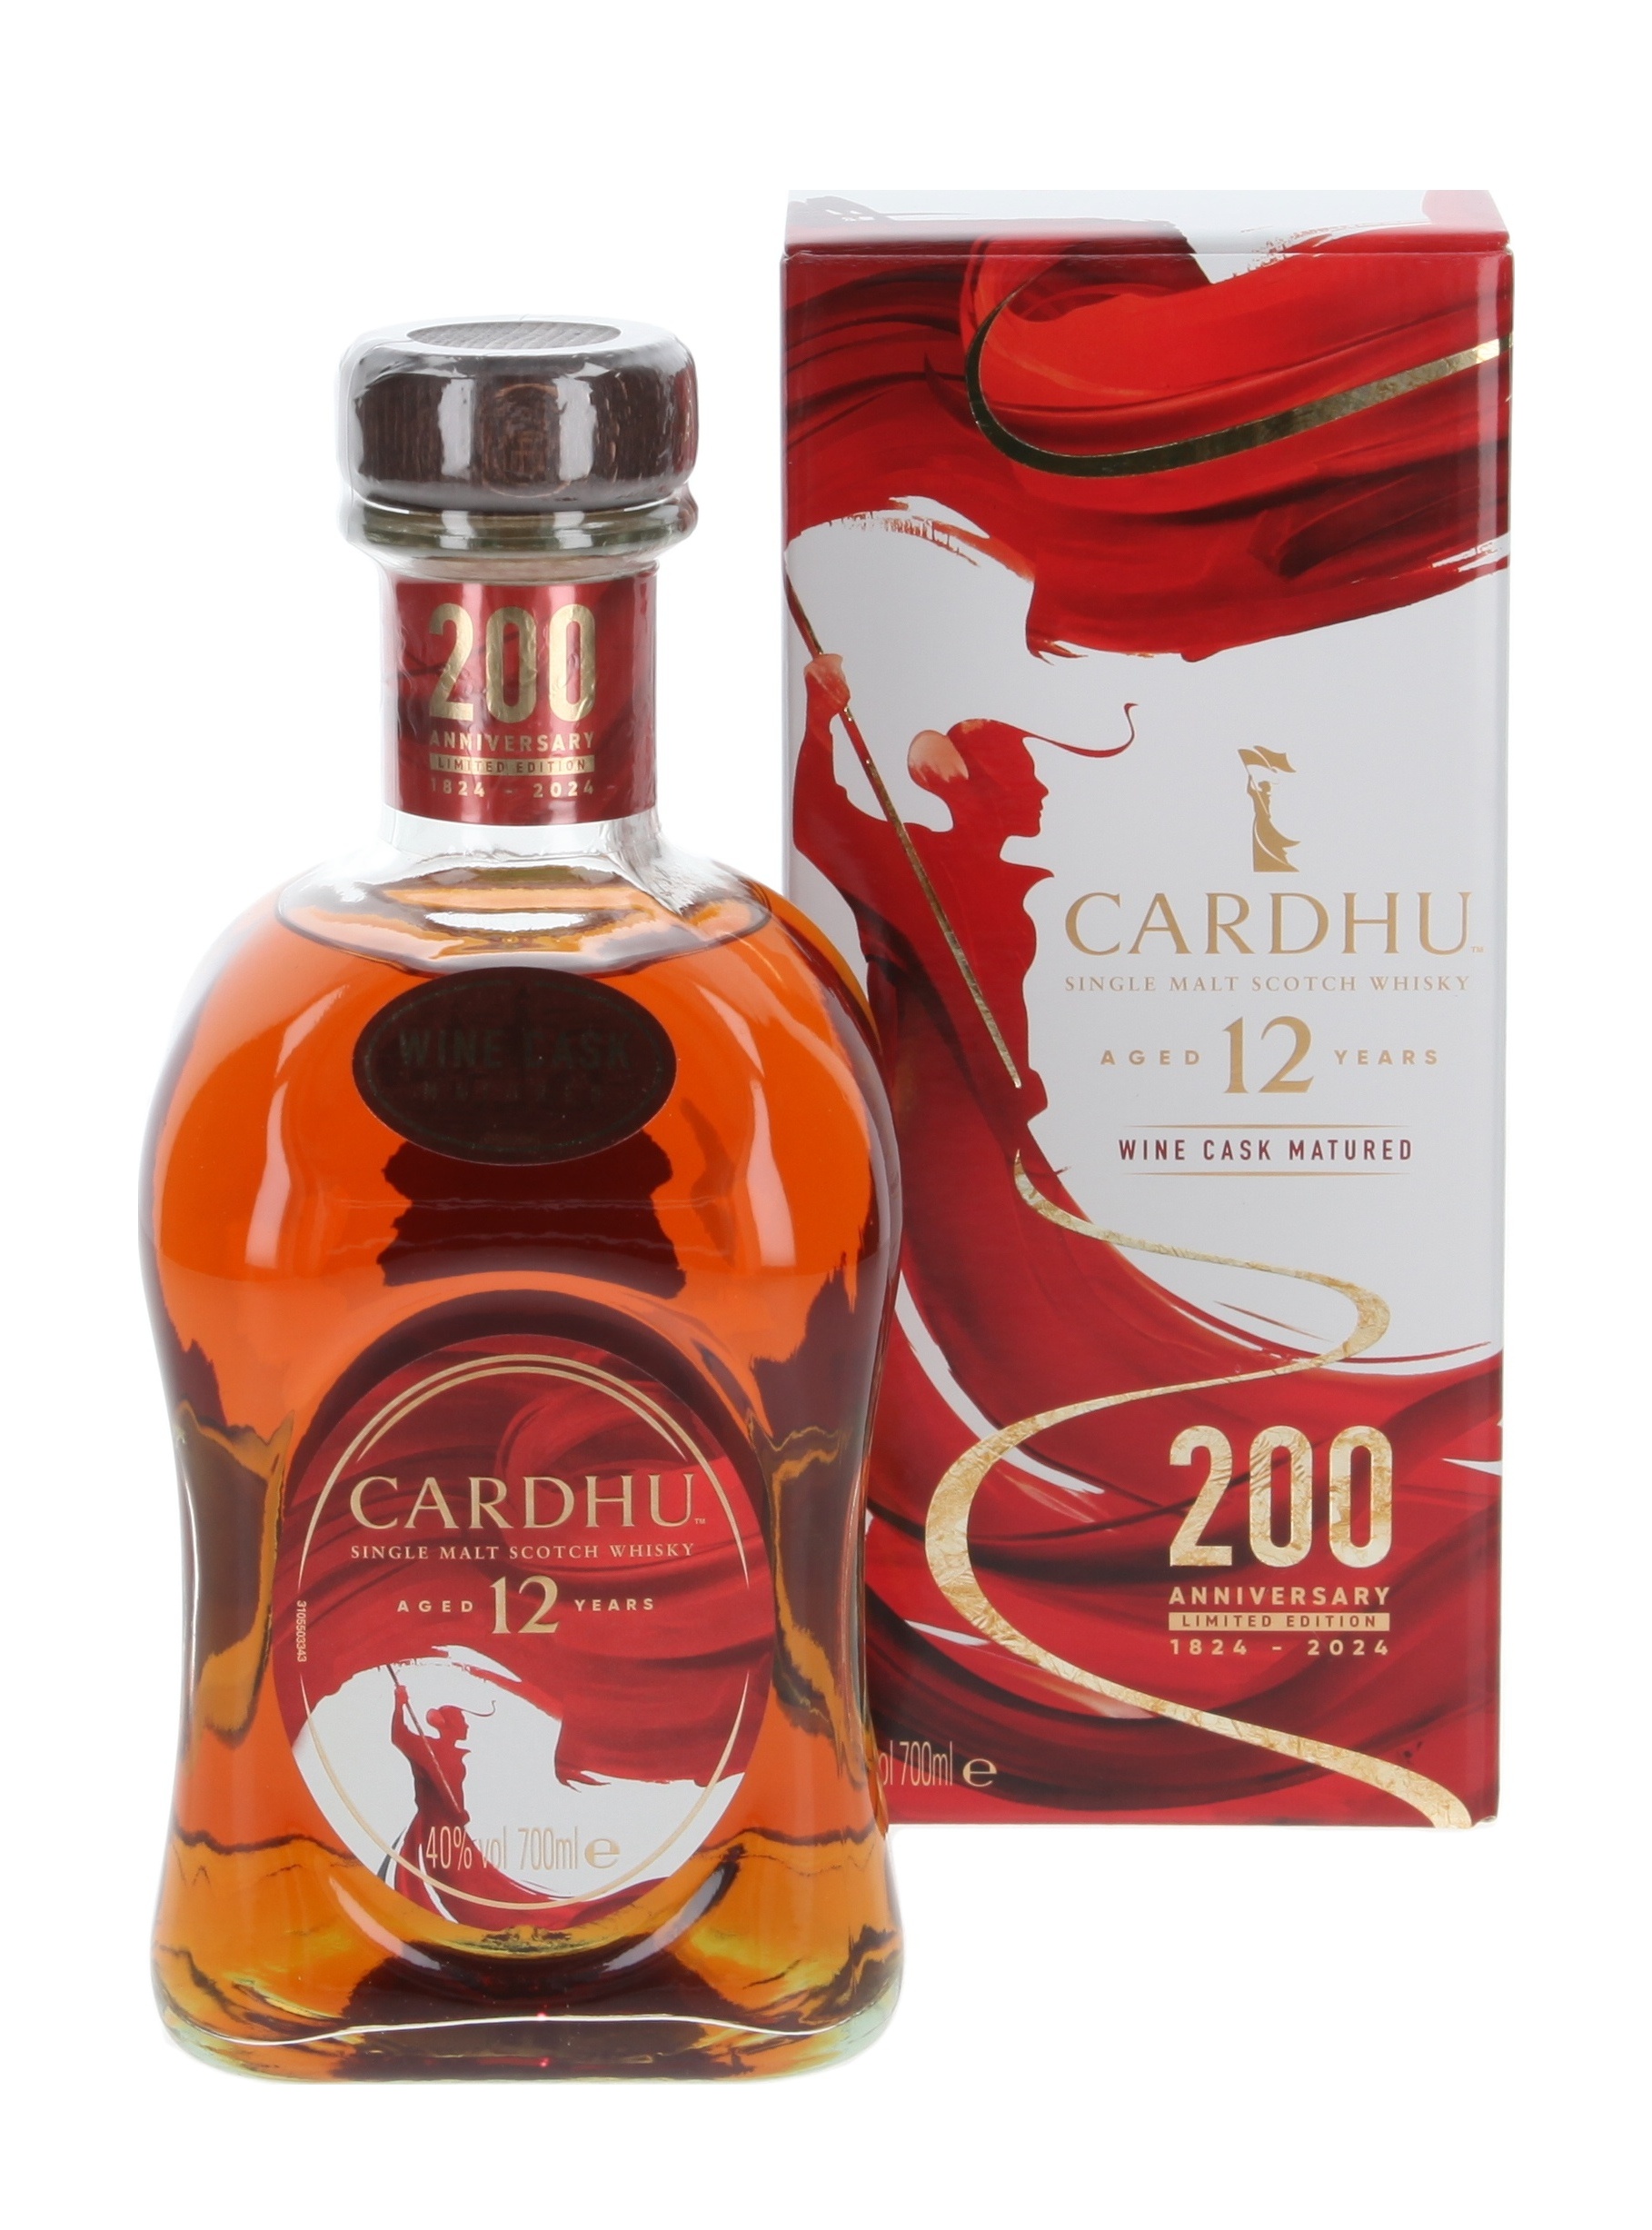 https://www.whisky.de/shop/out/pictures/master/product/1/ximage_CARDH12WC_1.jpg,q1704725412.pagespeed.ic.tgc6anj48c.jpg